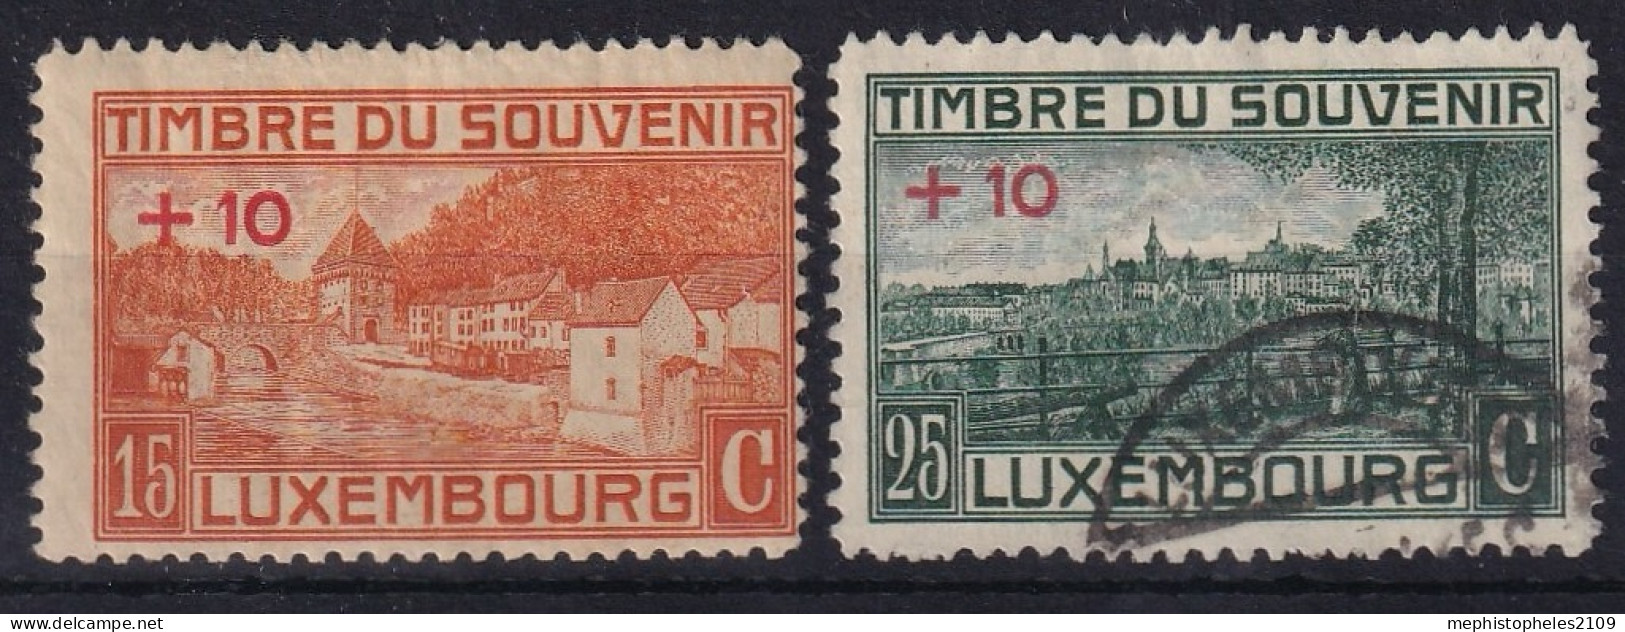 LUXEMBOURG 1921 - MLH/canceled - Sc# B2, B3 - 1914-24 Marie-Adelaide